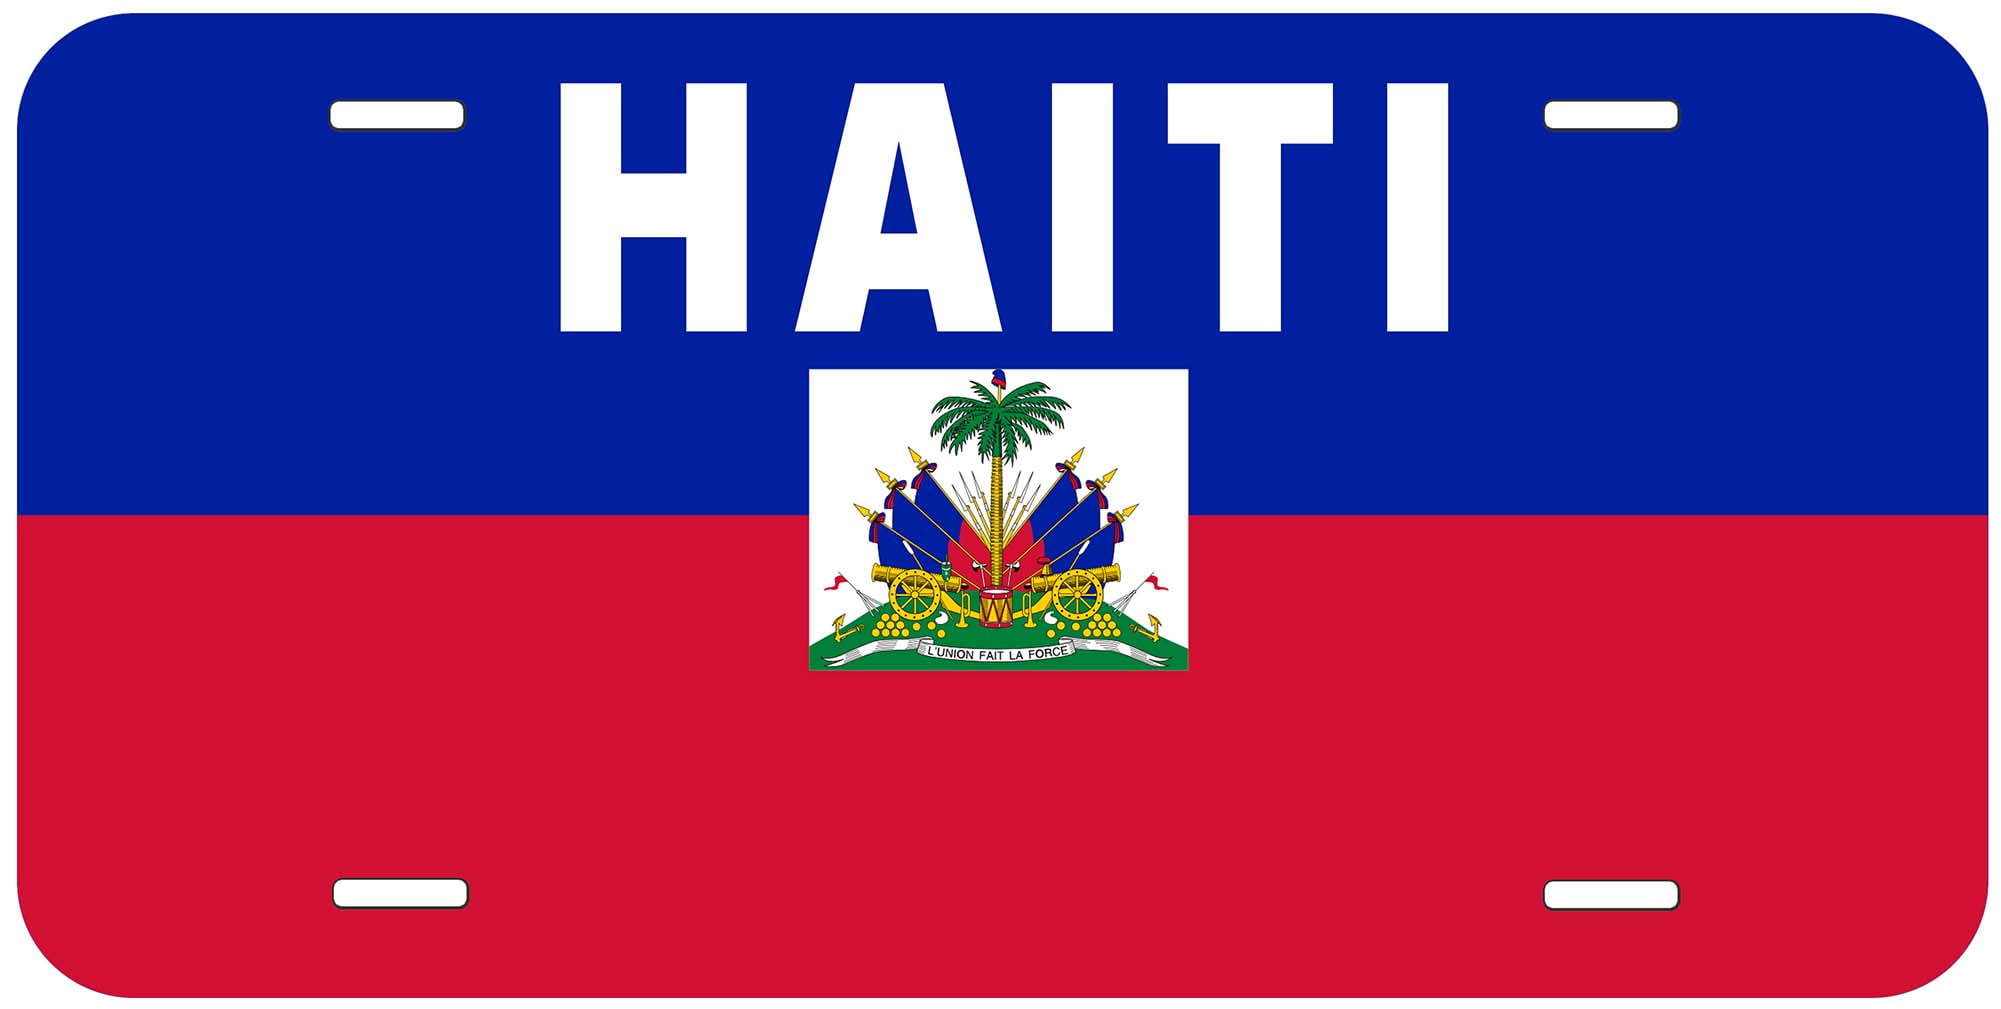 Haiti Haiti Wavy Flag Decorative License Plate Frame Auto Tag for Front of Car Stainless Steel Car Holder 